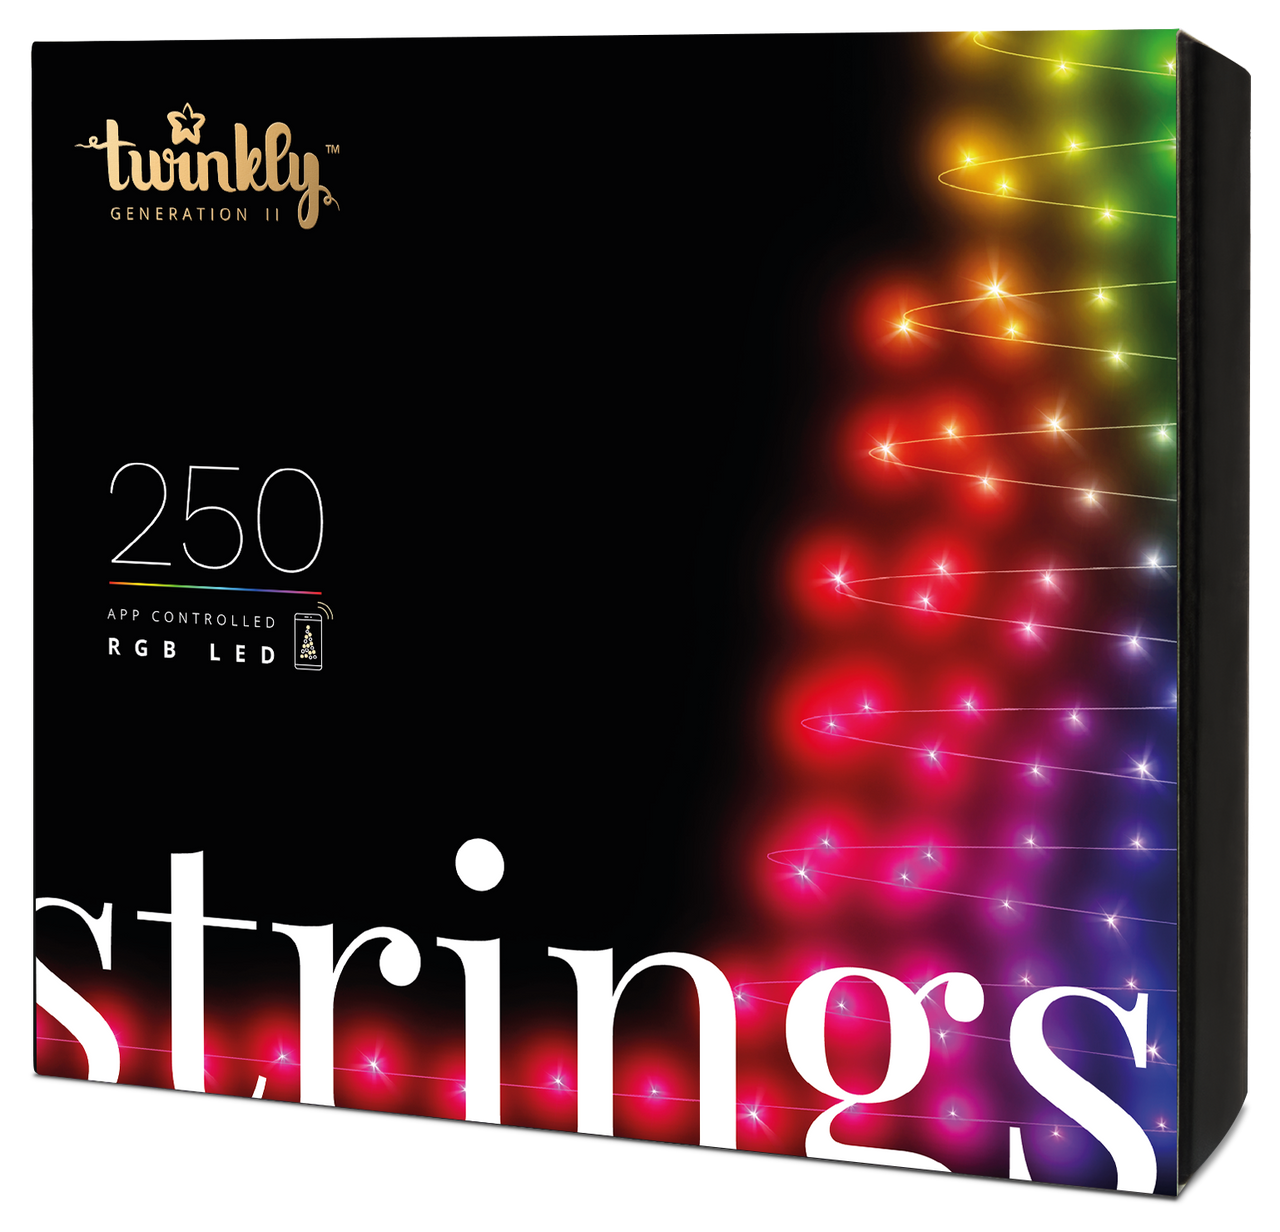 20m Twinkly Smart App Controlled String Lights 250 LED Multi Coloured